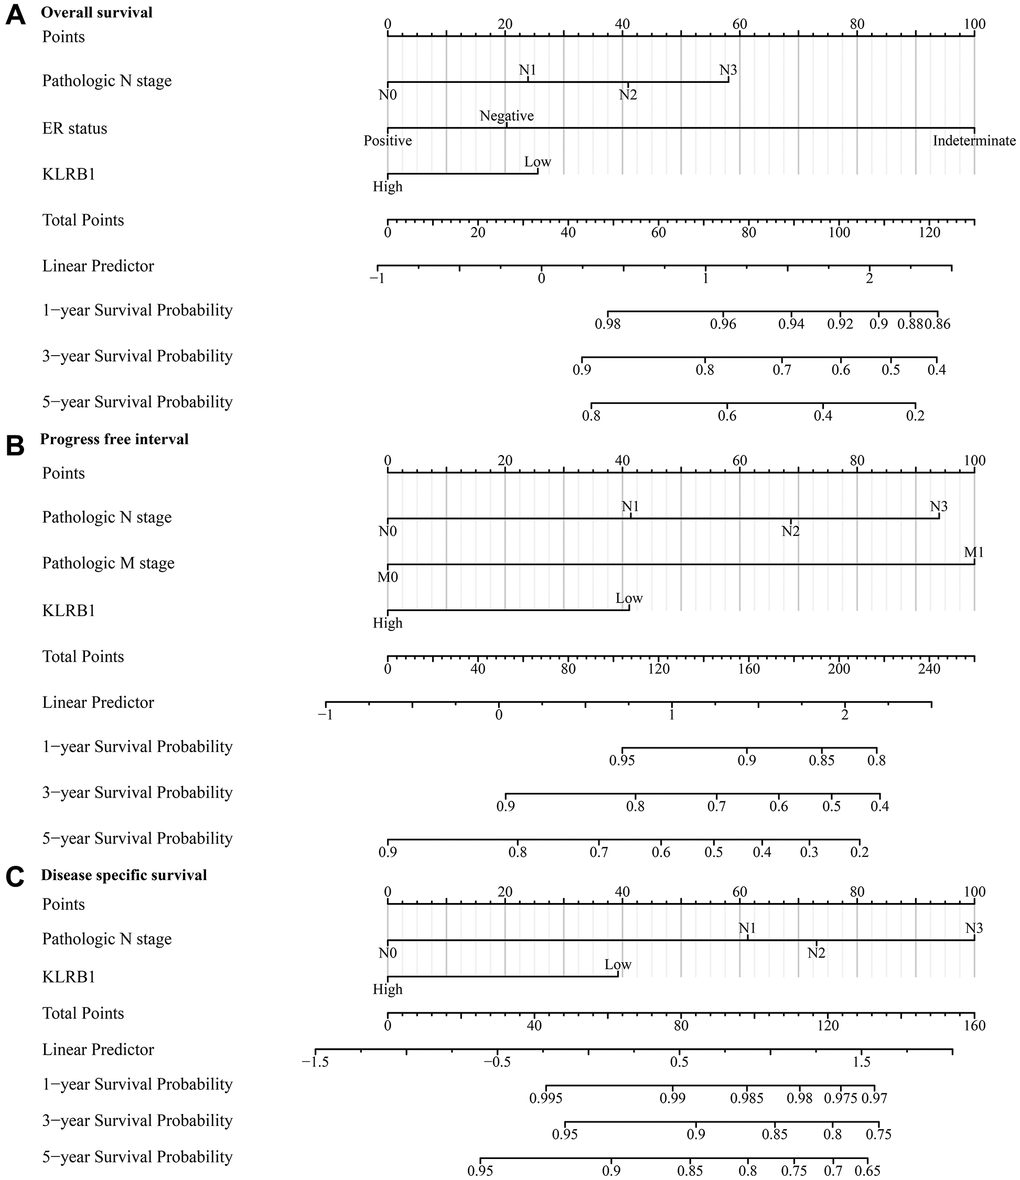 KLRB1-associated prognostic nomograms in BRCA patients. (A) OS; (B) PFI; (C) DSS. Abbreviations: BRCA: breast invasive carcinoma; OS: overall survival; PFI: progress free interval; DSS: disease specific survival.